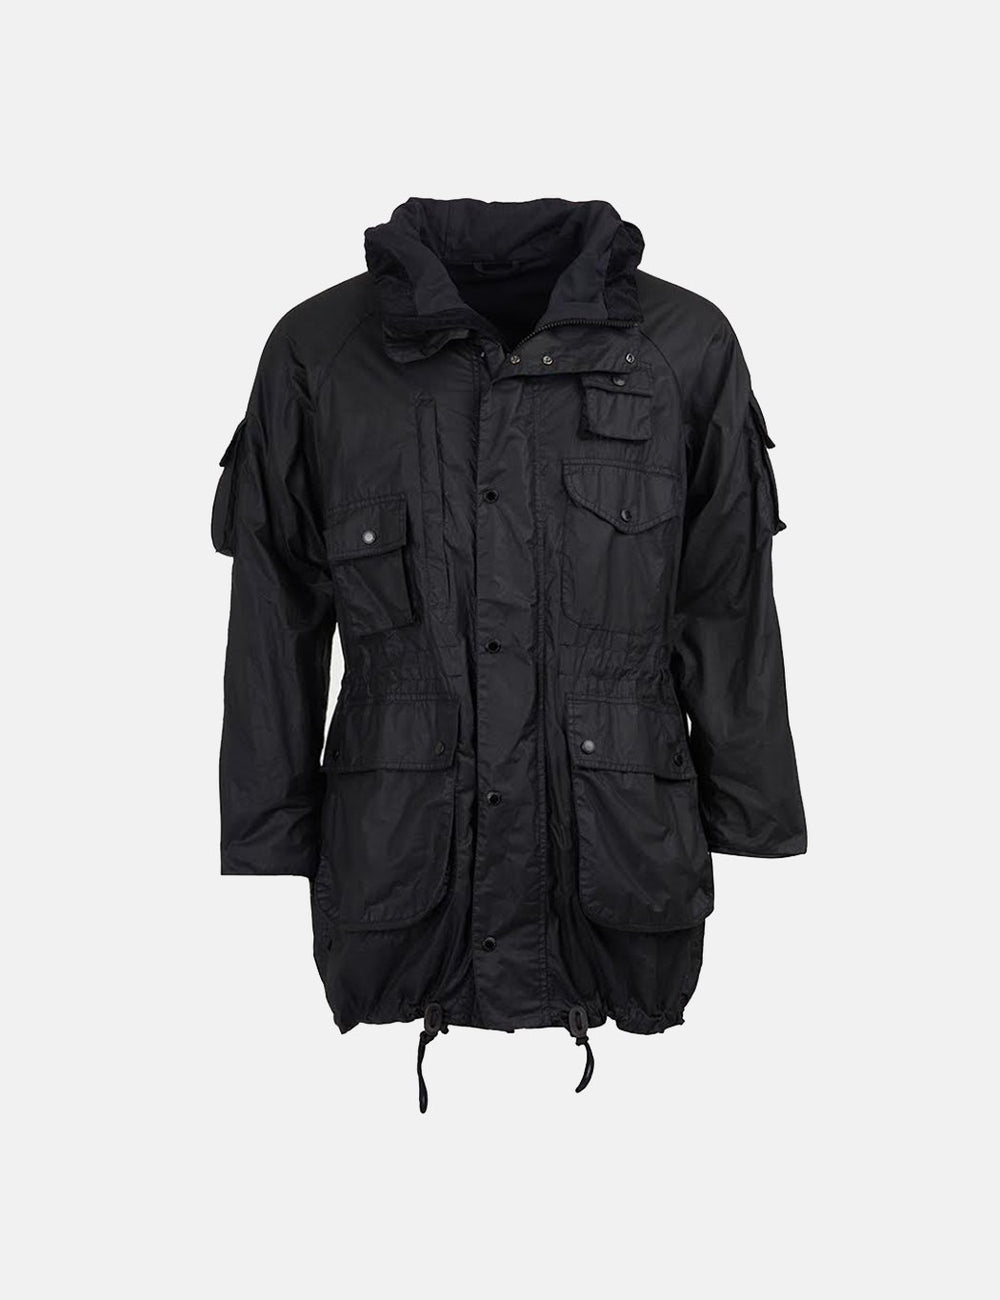 020142○ Barbour × Engineered Garments - その他